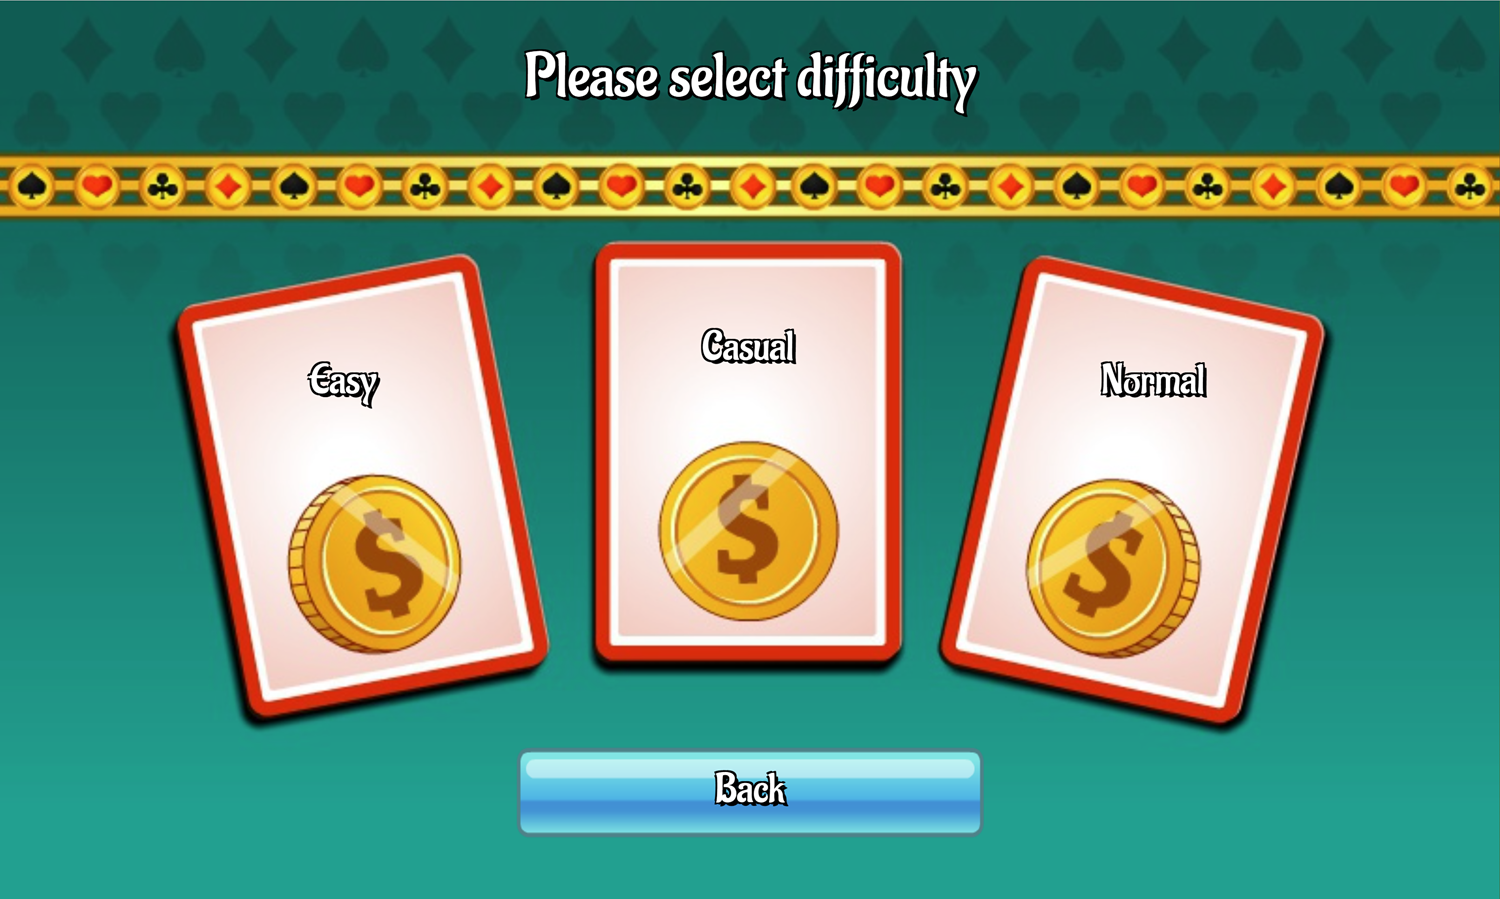 Forty Thieves Solitaire Game Difficulty Select Screen Screenshot.